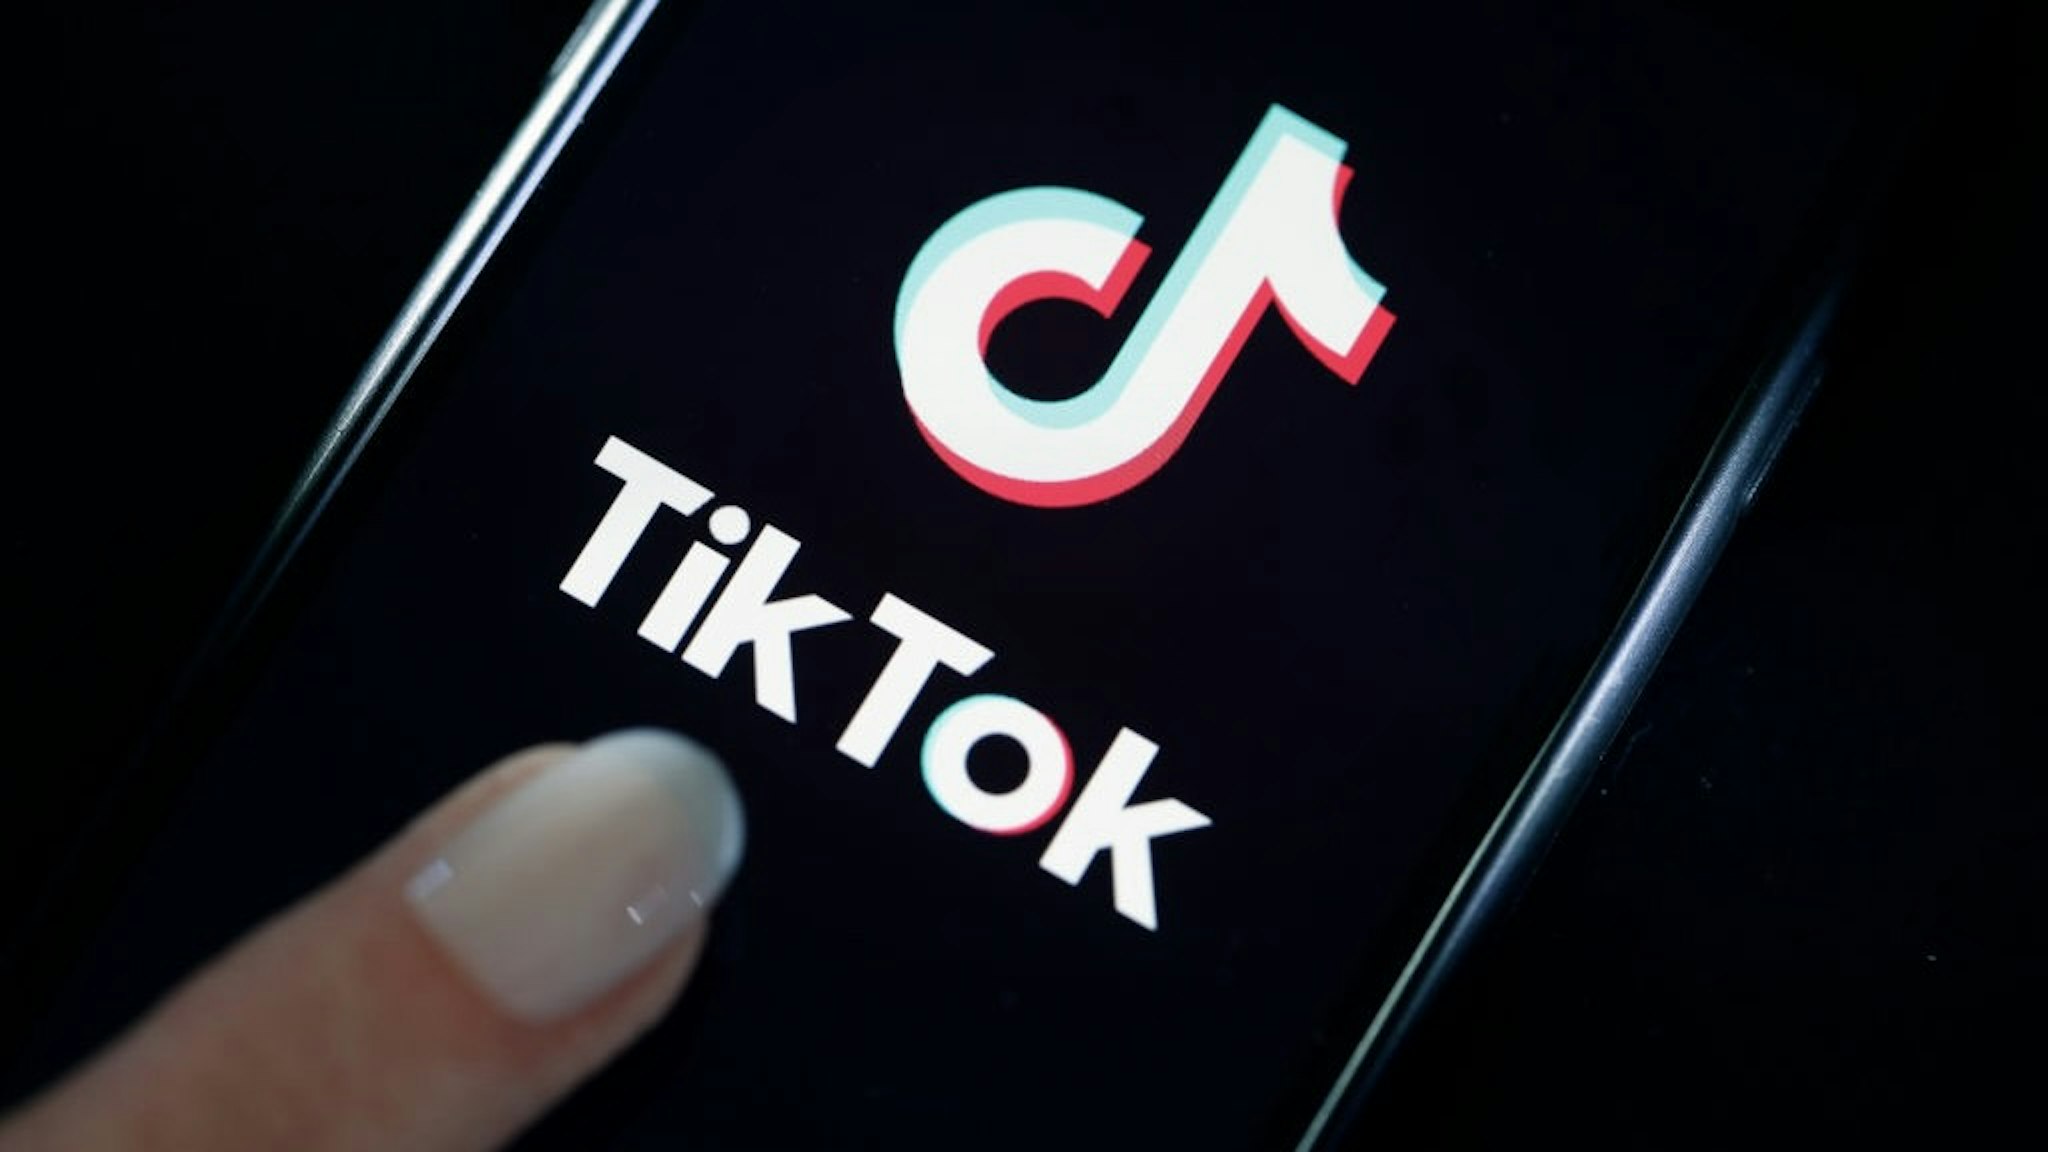 Tik Tok media App Illustration PARIS, FRANCE - MARCH 05: In this photo illustration, the social media application logo, Tik Tok is displayed on the screen of an iPhone on March 05, 2019 in Paris, France. The social network broke the rules for the protection of children's online privacy (COPPA) and was fined $ 5.7 million. The fact TikTok criticized is quite serious in the United States, the platform, which currently has more than 500 million users worldwide, collected data that should not have asked minors. TikTok, also known as Douyin in China, is a media app for creating and sharing short videos. Owned by ByteDance, Tik Tok is a leading video platform in Asia, United States, and other parts of the world. In 2018, the application gained popularity and became the most downloaded app in the U.S. in October 2018. (Photo by Chesnot/Getty Images) Chesnot / Contributor